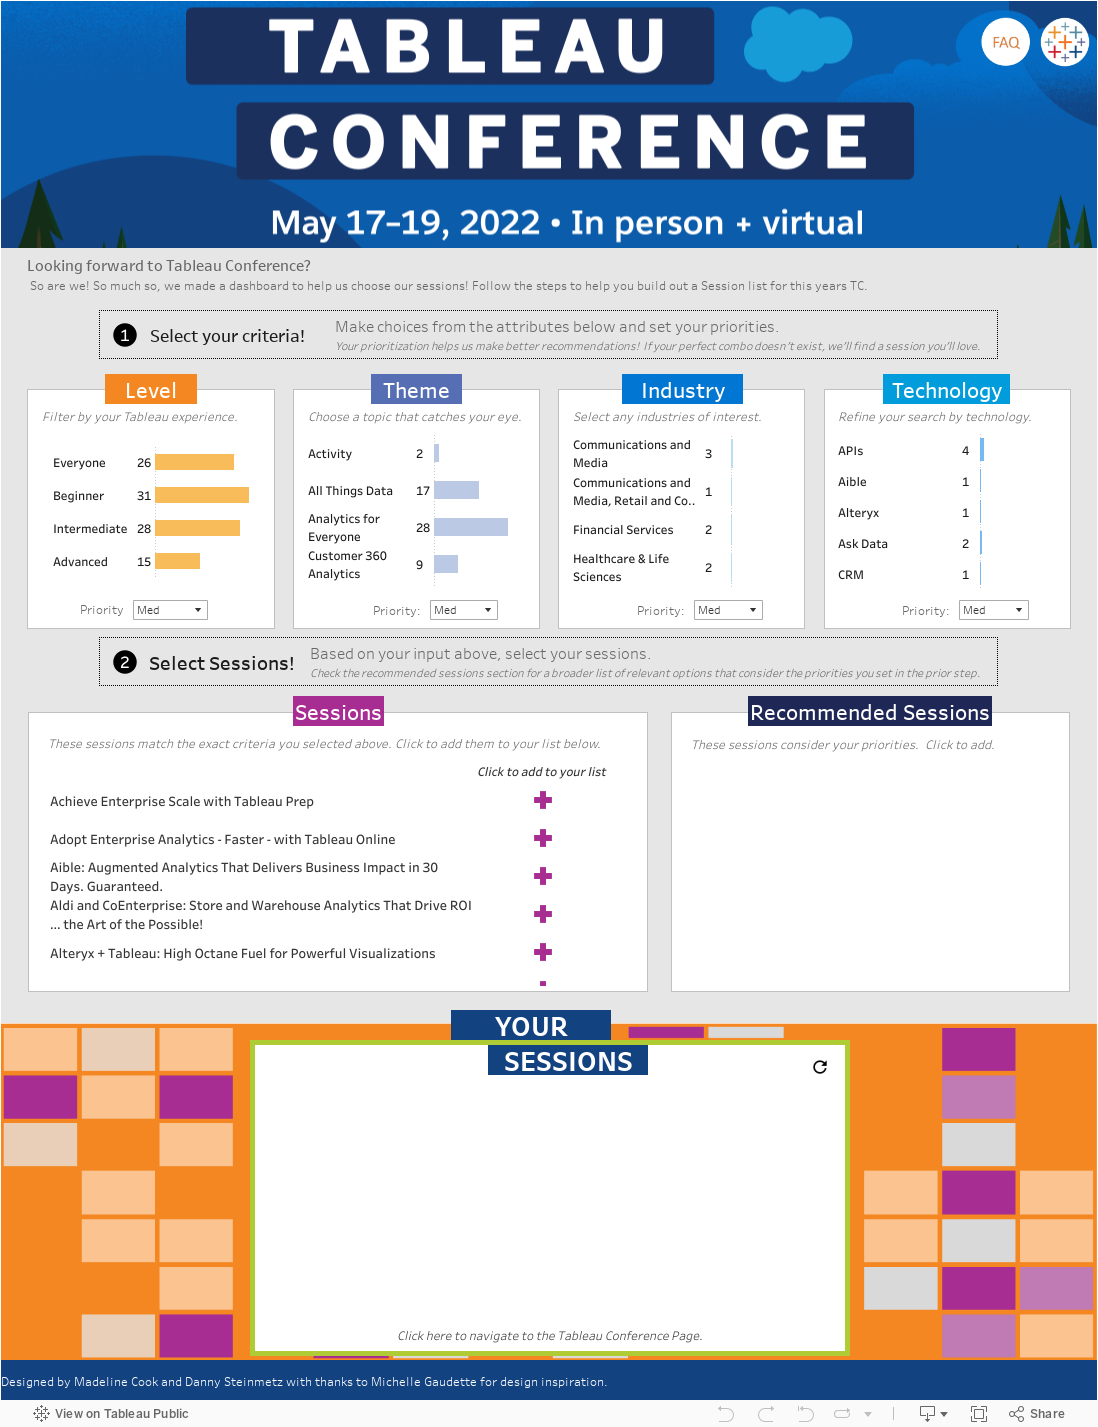 Tableau Conference 2022 In-Person Sessions 